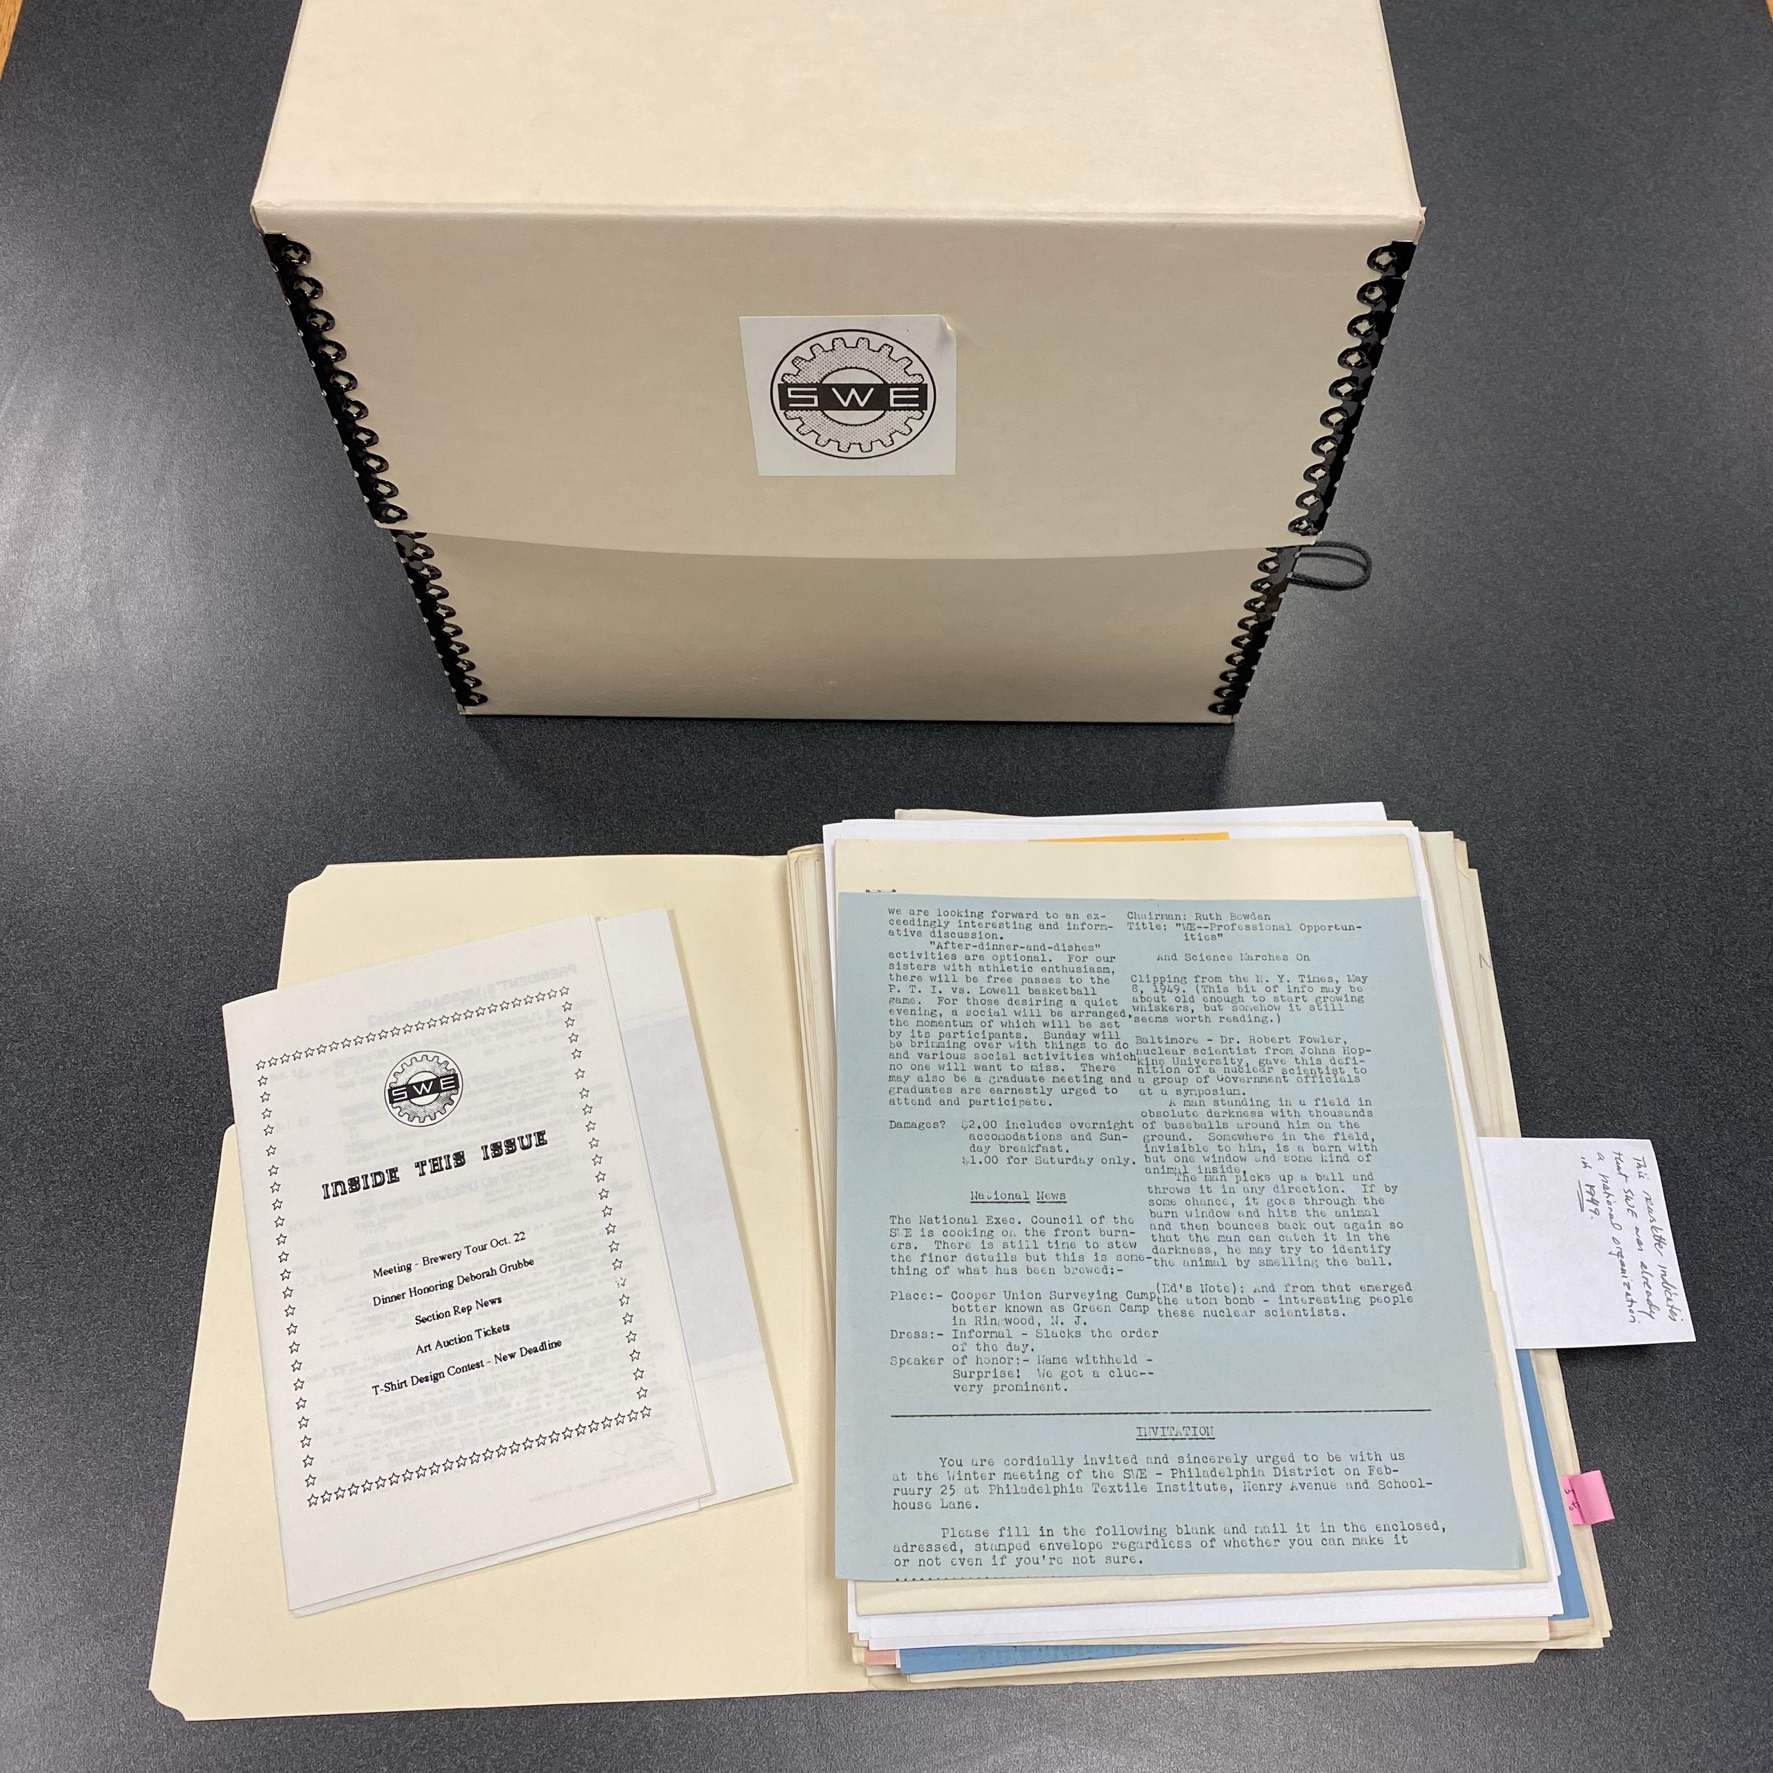 Files on a desk with an archival file box